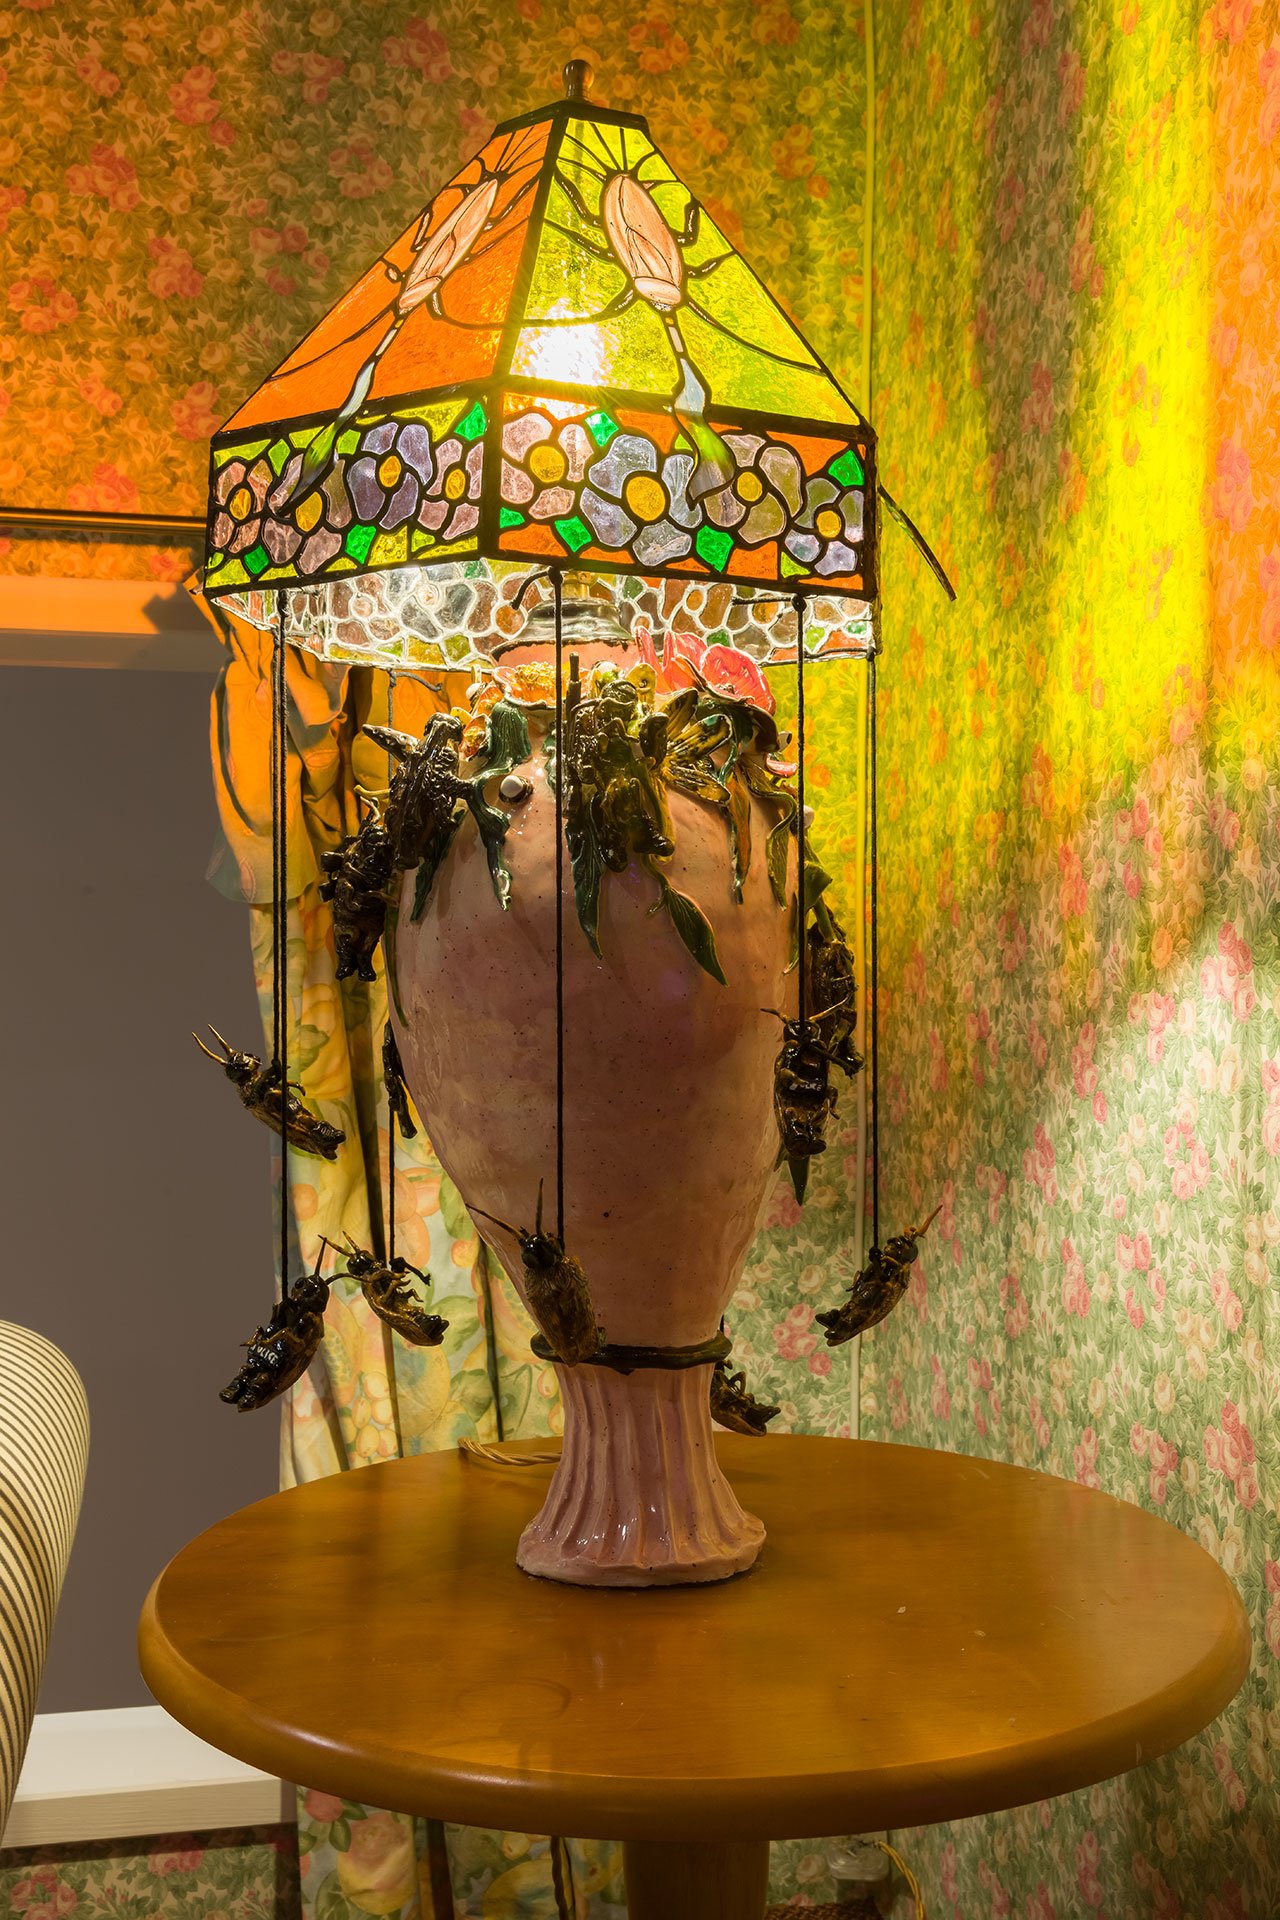 Installation view of Lindsey Mendick, Strange Clay: Ceramics in Contemporary Art at the Hayward Gallery (26 October 2022 - 8 January 2023). Photo: Mark Blower. Courtesy the Hayward Gallery.